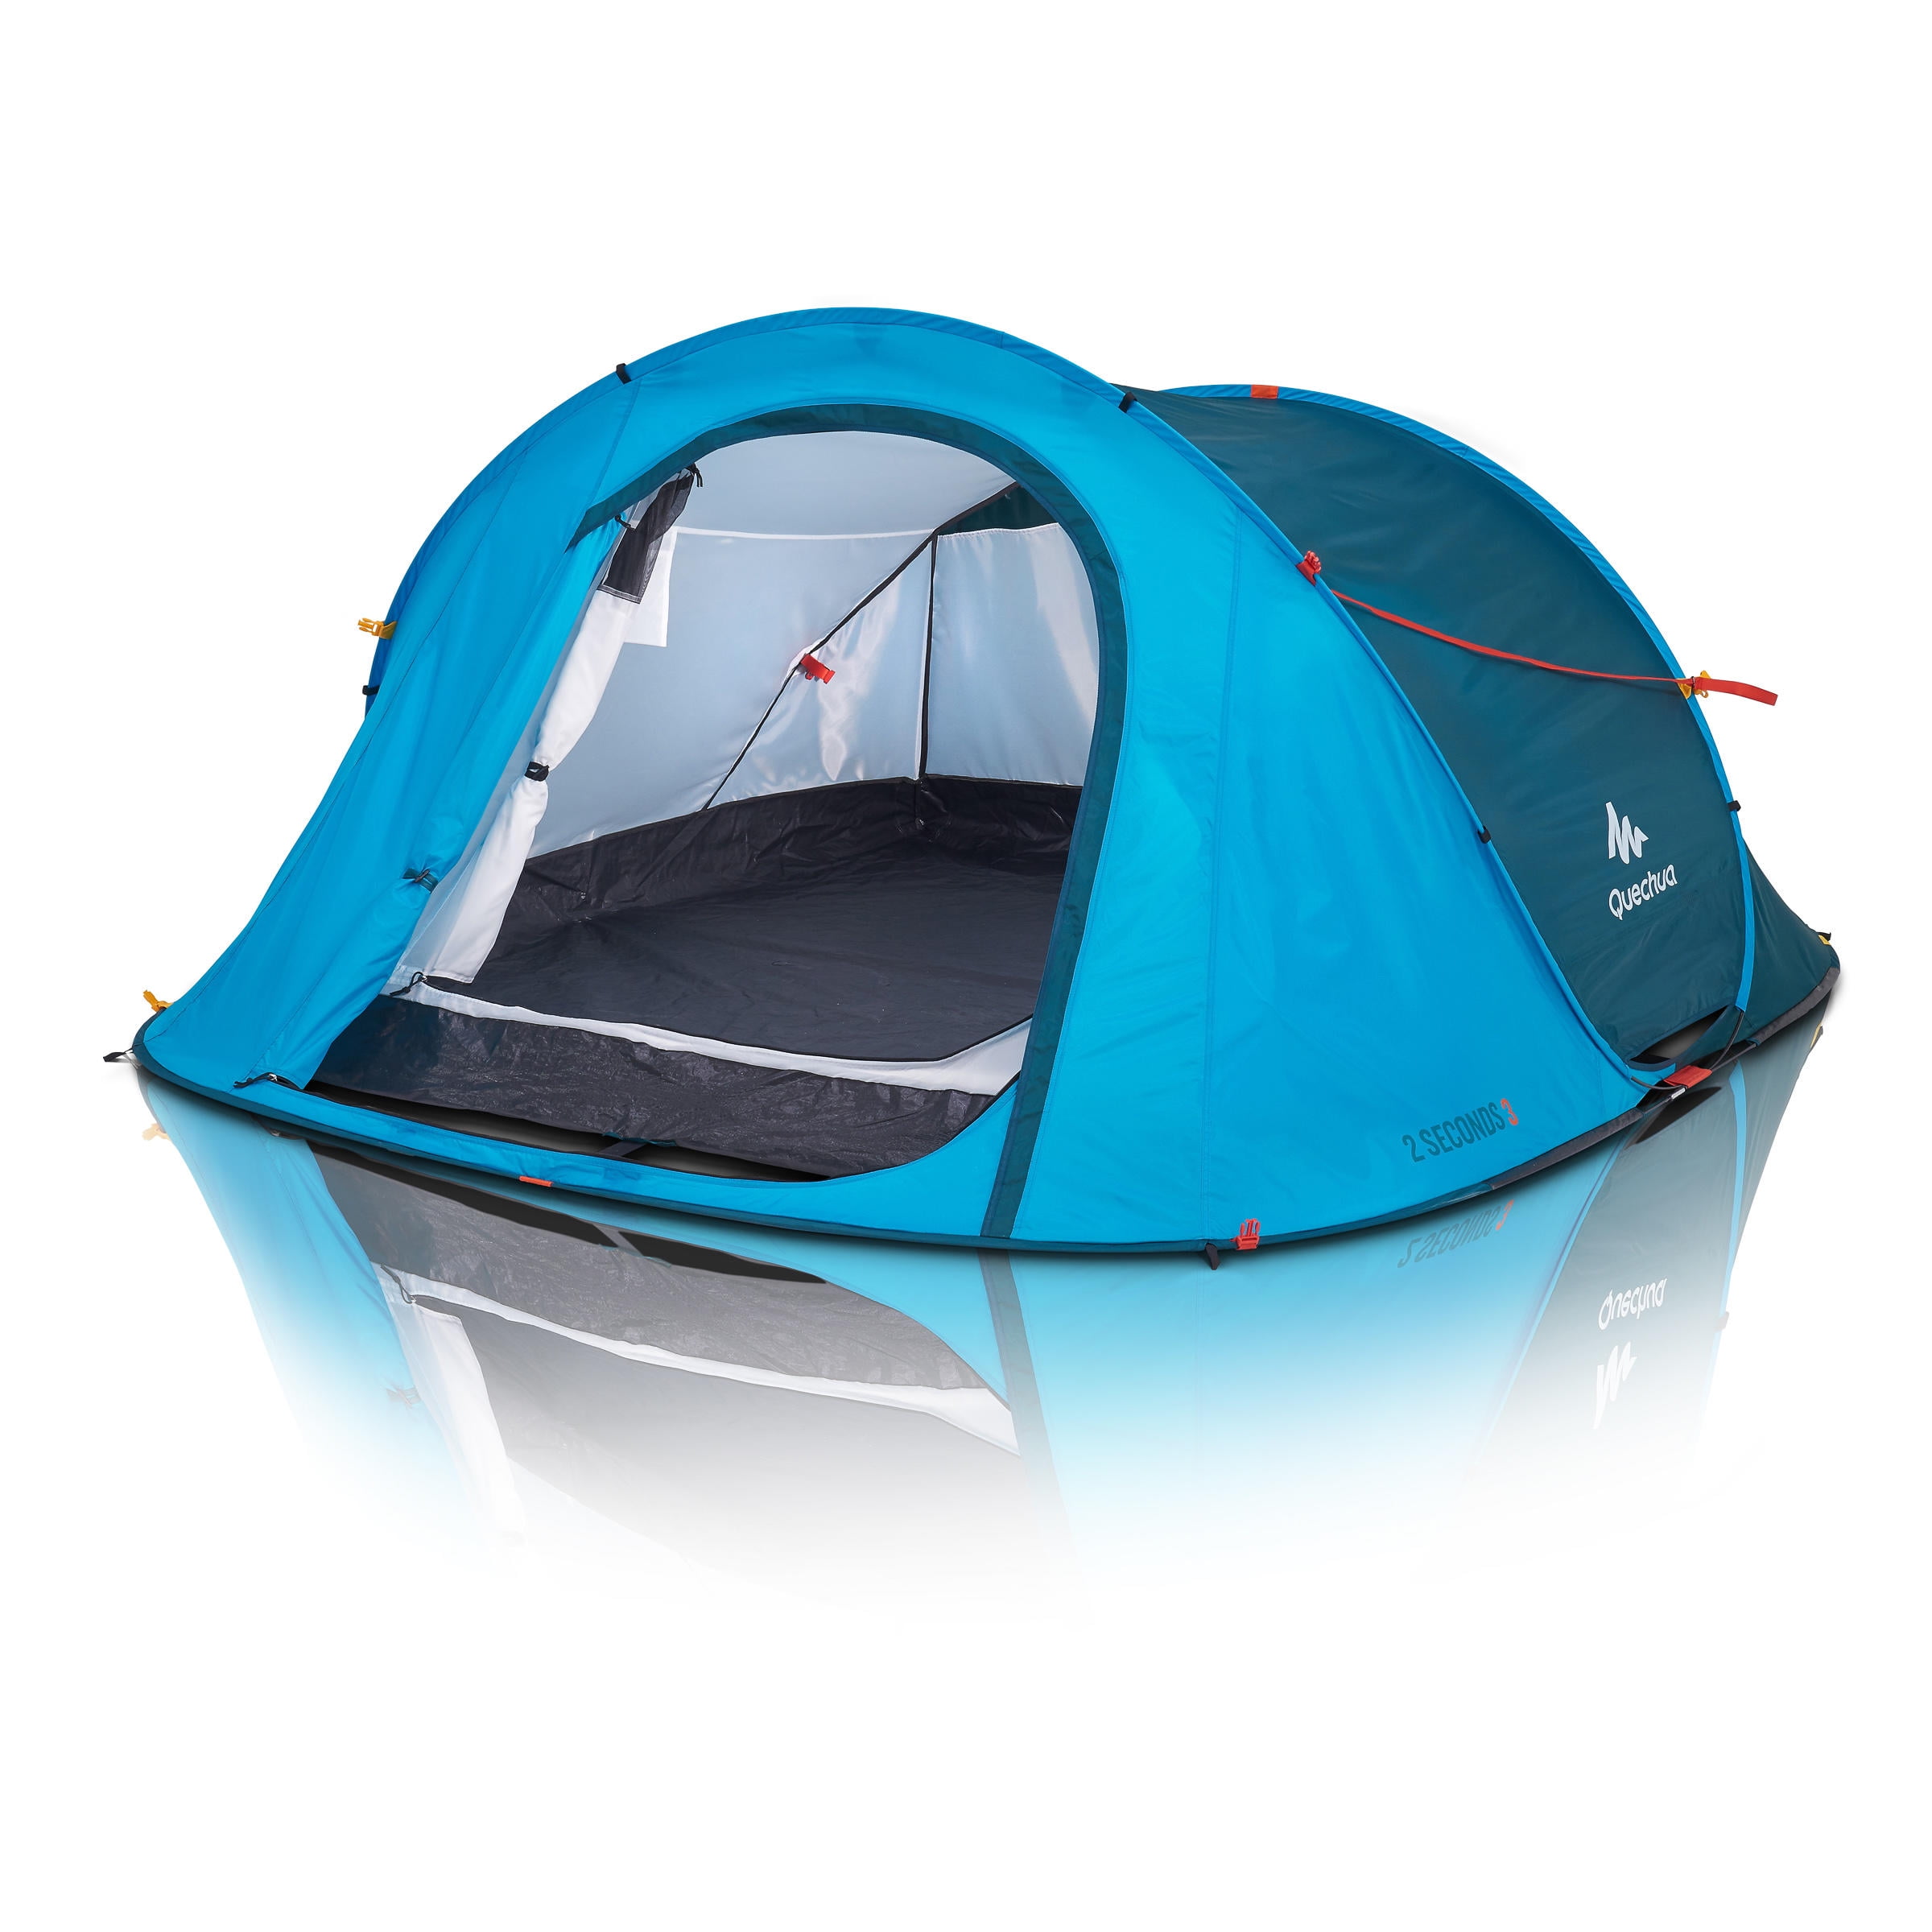 Decathlon Quechua, 3 Person 2 Second Pop Up Camping Tent, with Waterproof Technology, Double Wall Technology, Blue